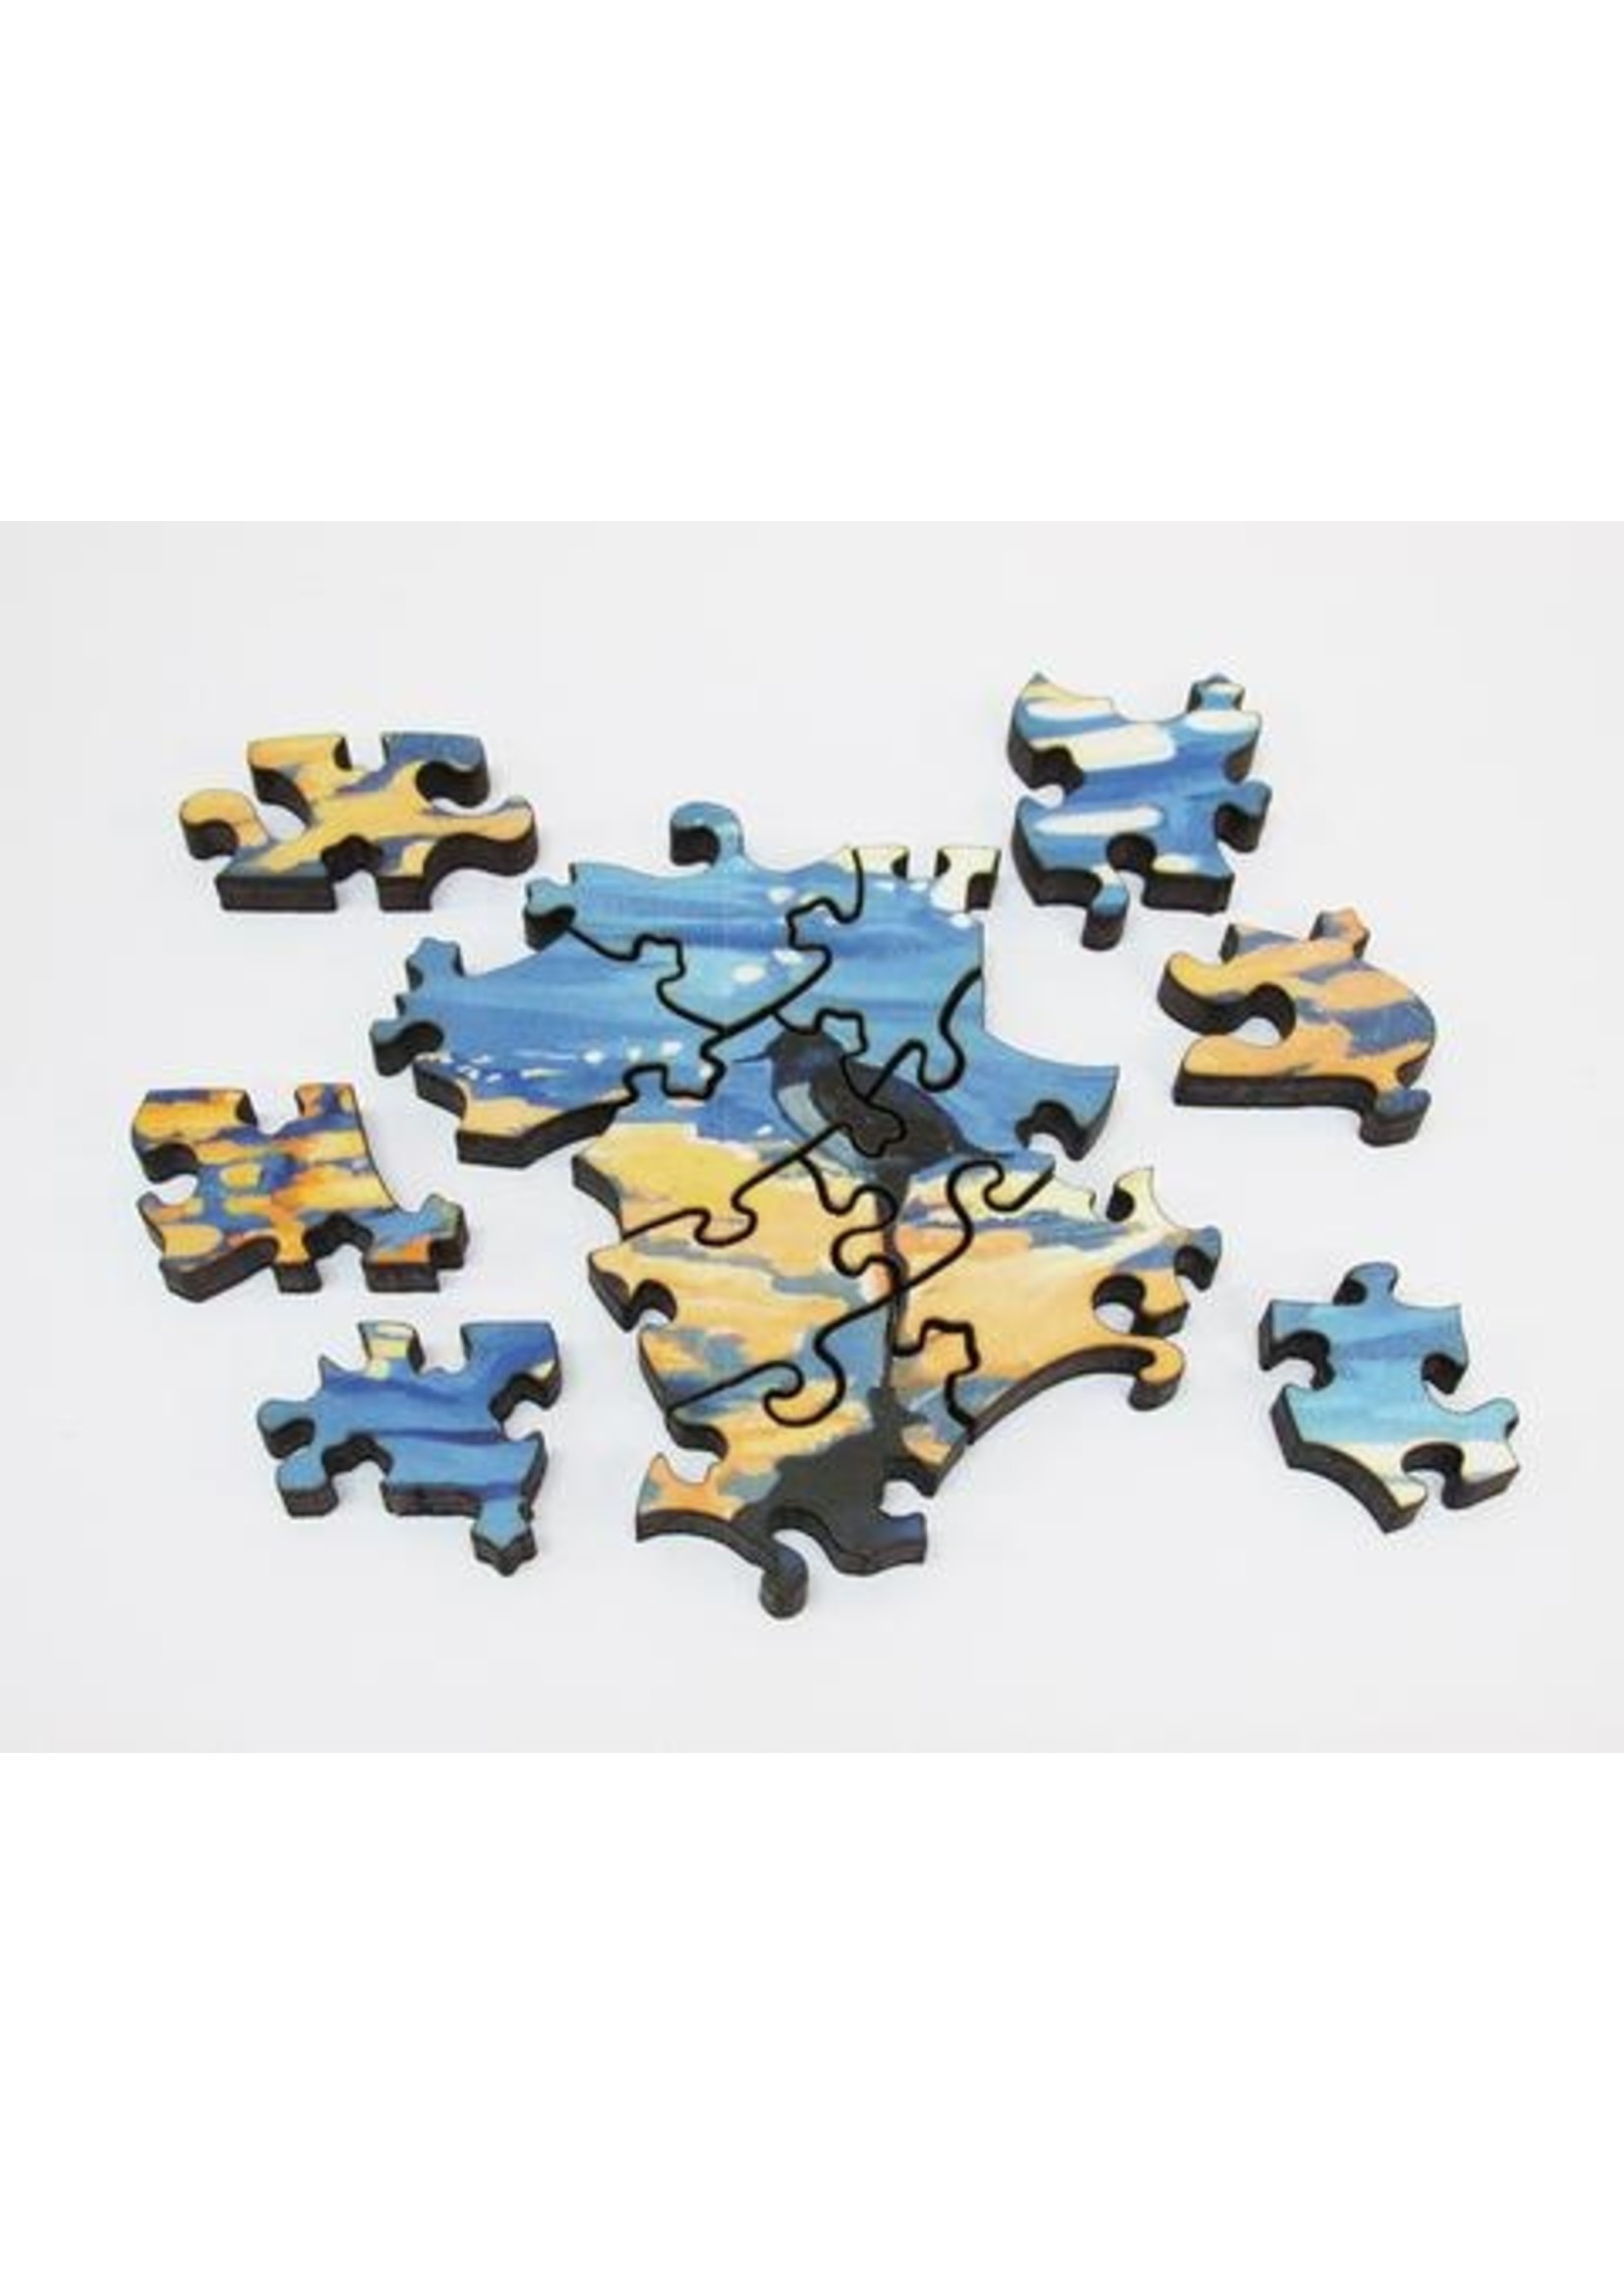 Artifact Puzzles "Sandpipers" Wooden Jigsaw Puzzle